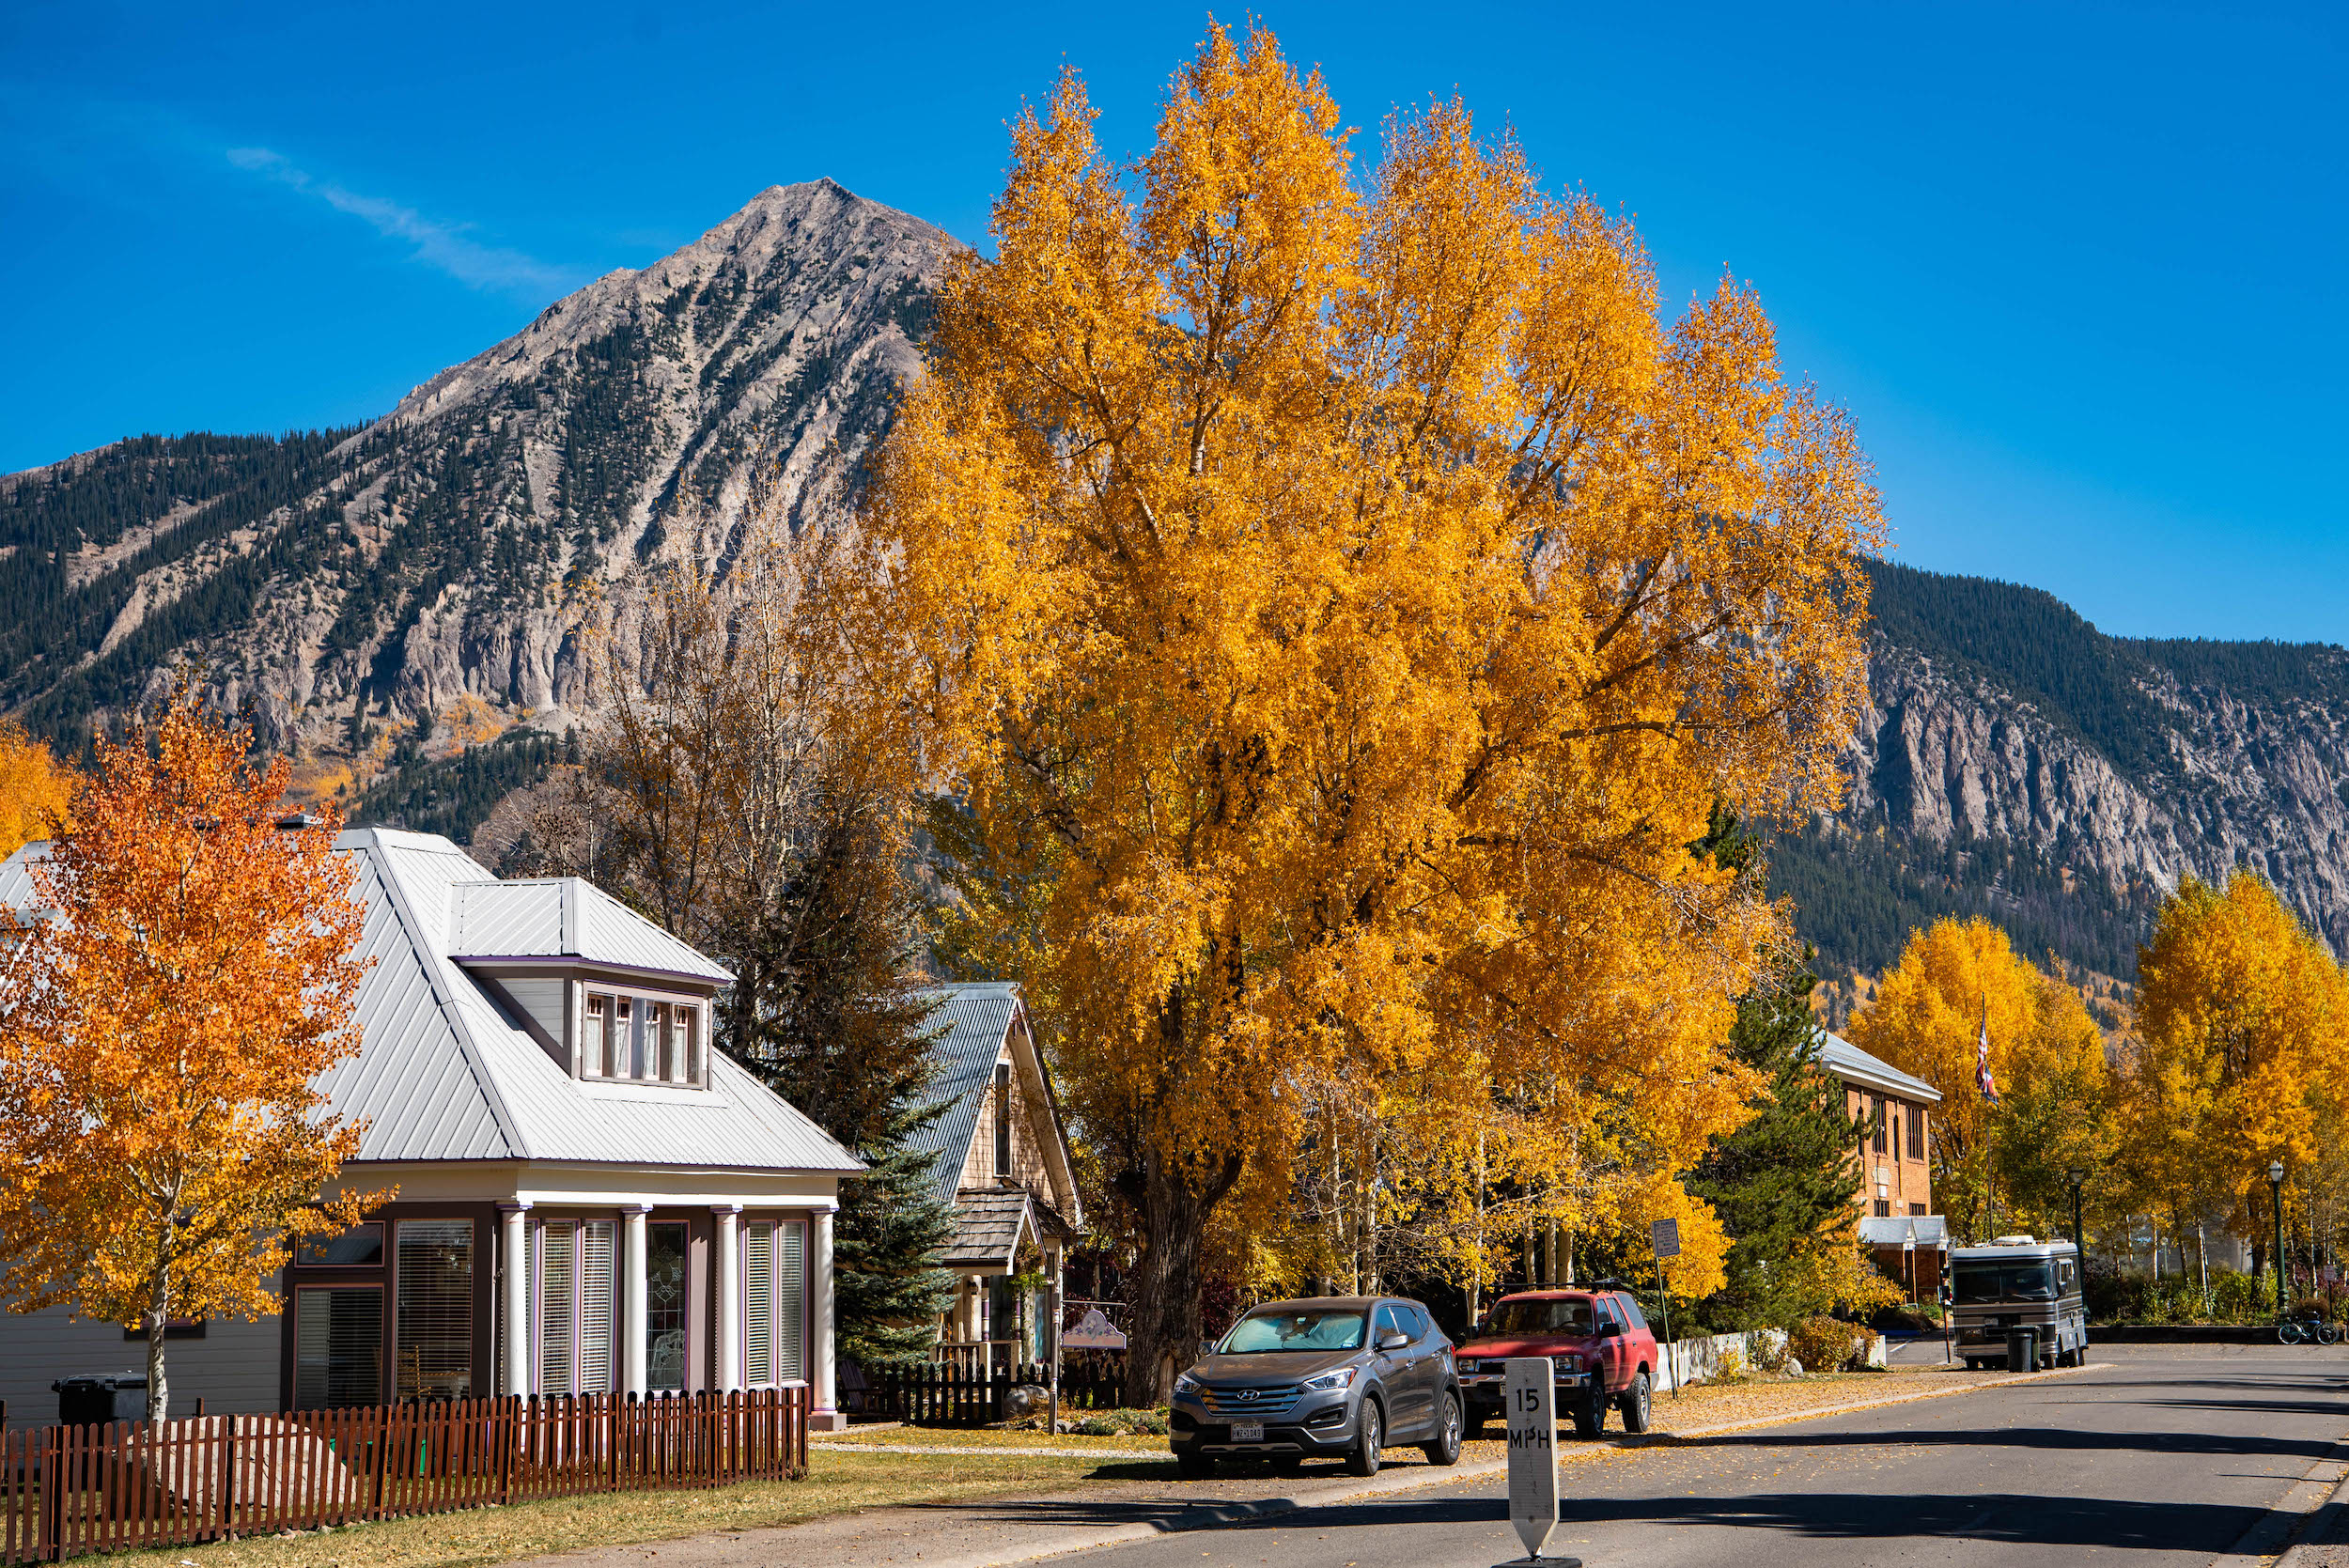 A view of a street with a mountain peak and a tree bursting with fall leaves